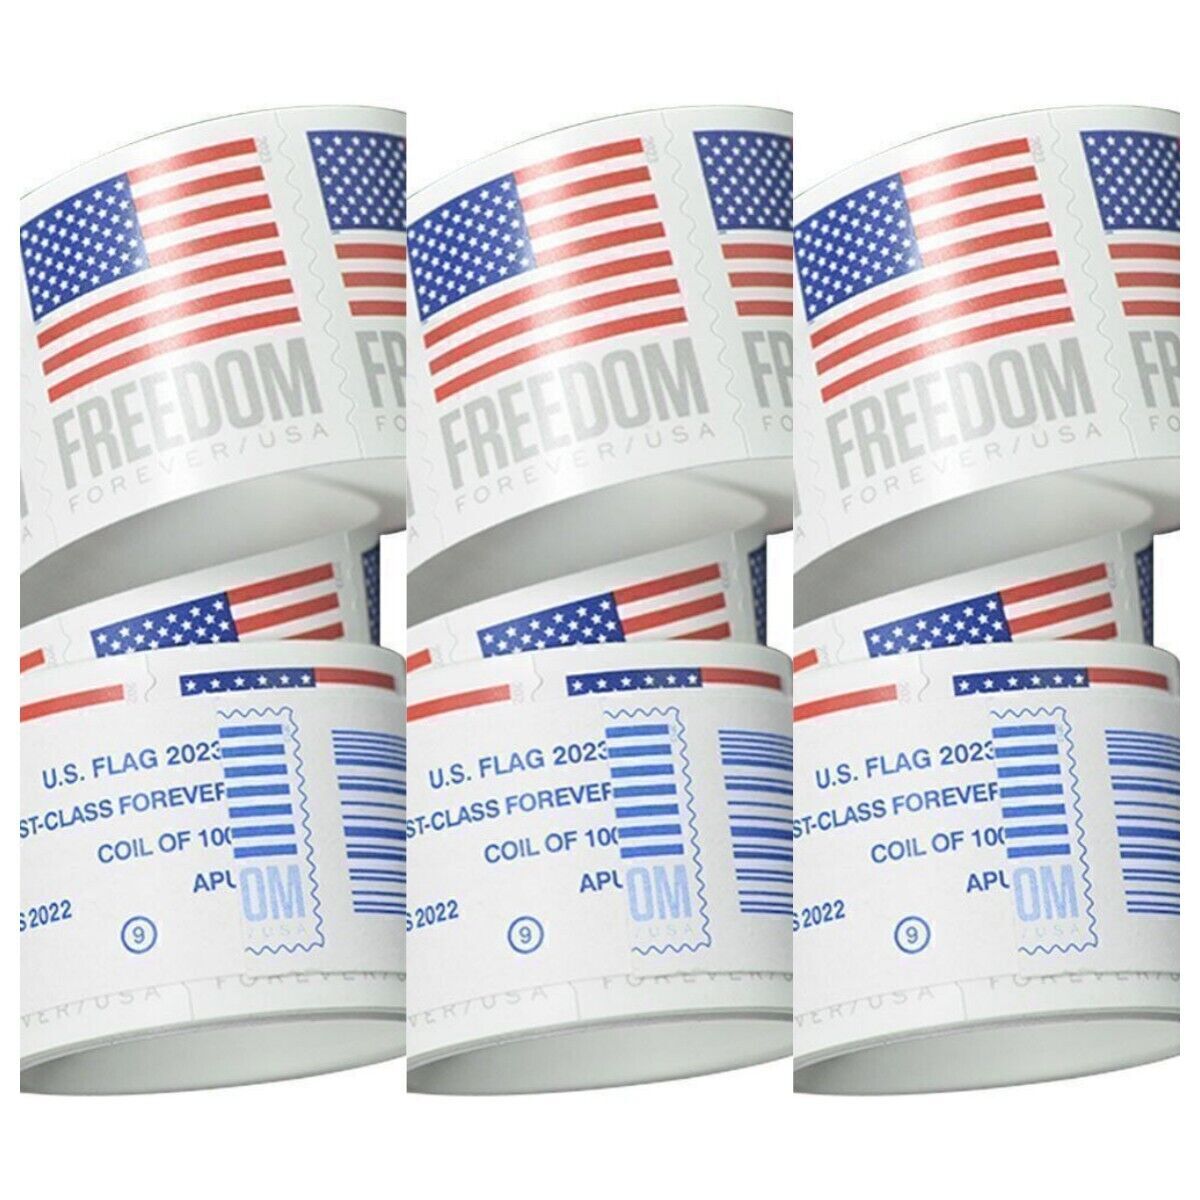 2023 US Flags 2 Rolls of 100 USA Freedom Total 200Pcs